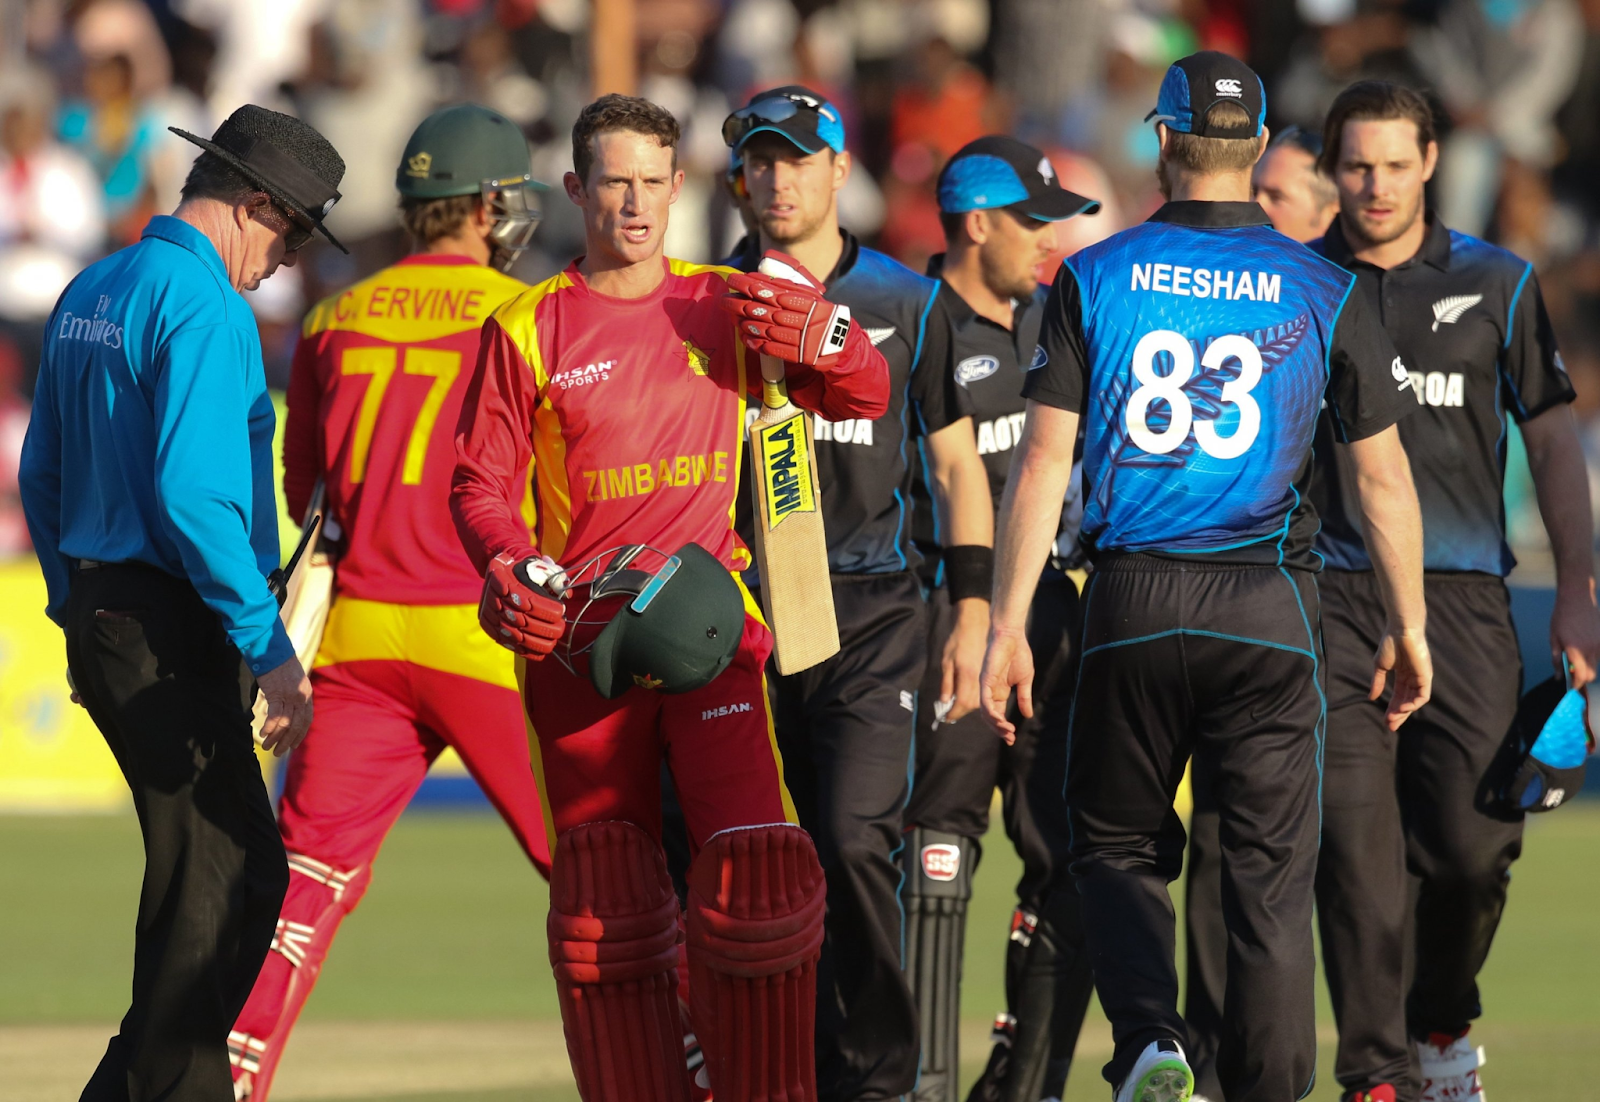 New Zealand vs Zimbabwe - fifth-lowest match aggregate in ICC Men's T20 World Cup.